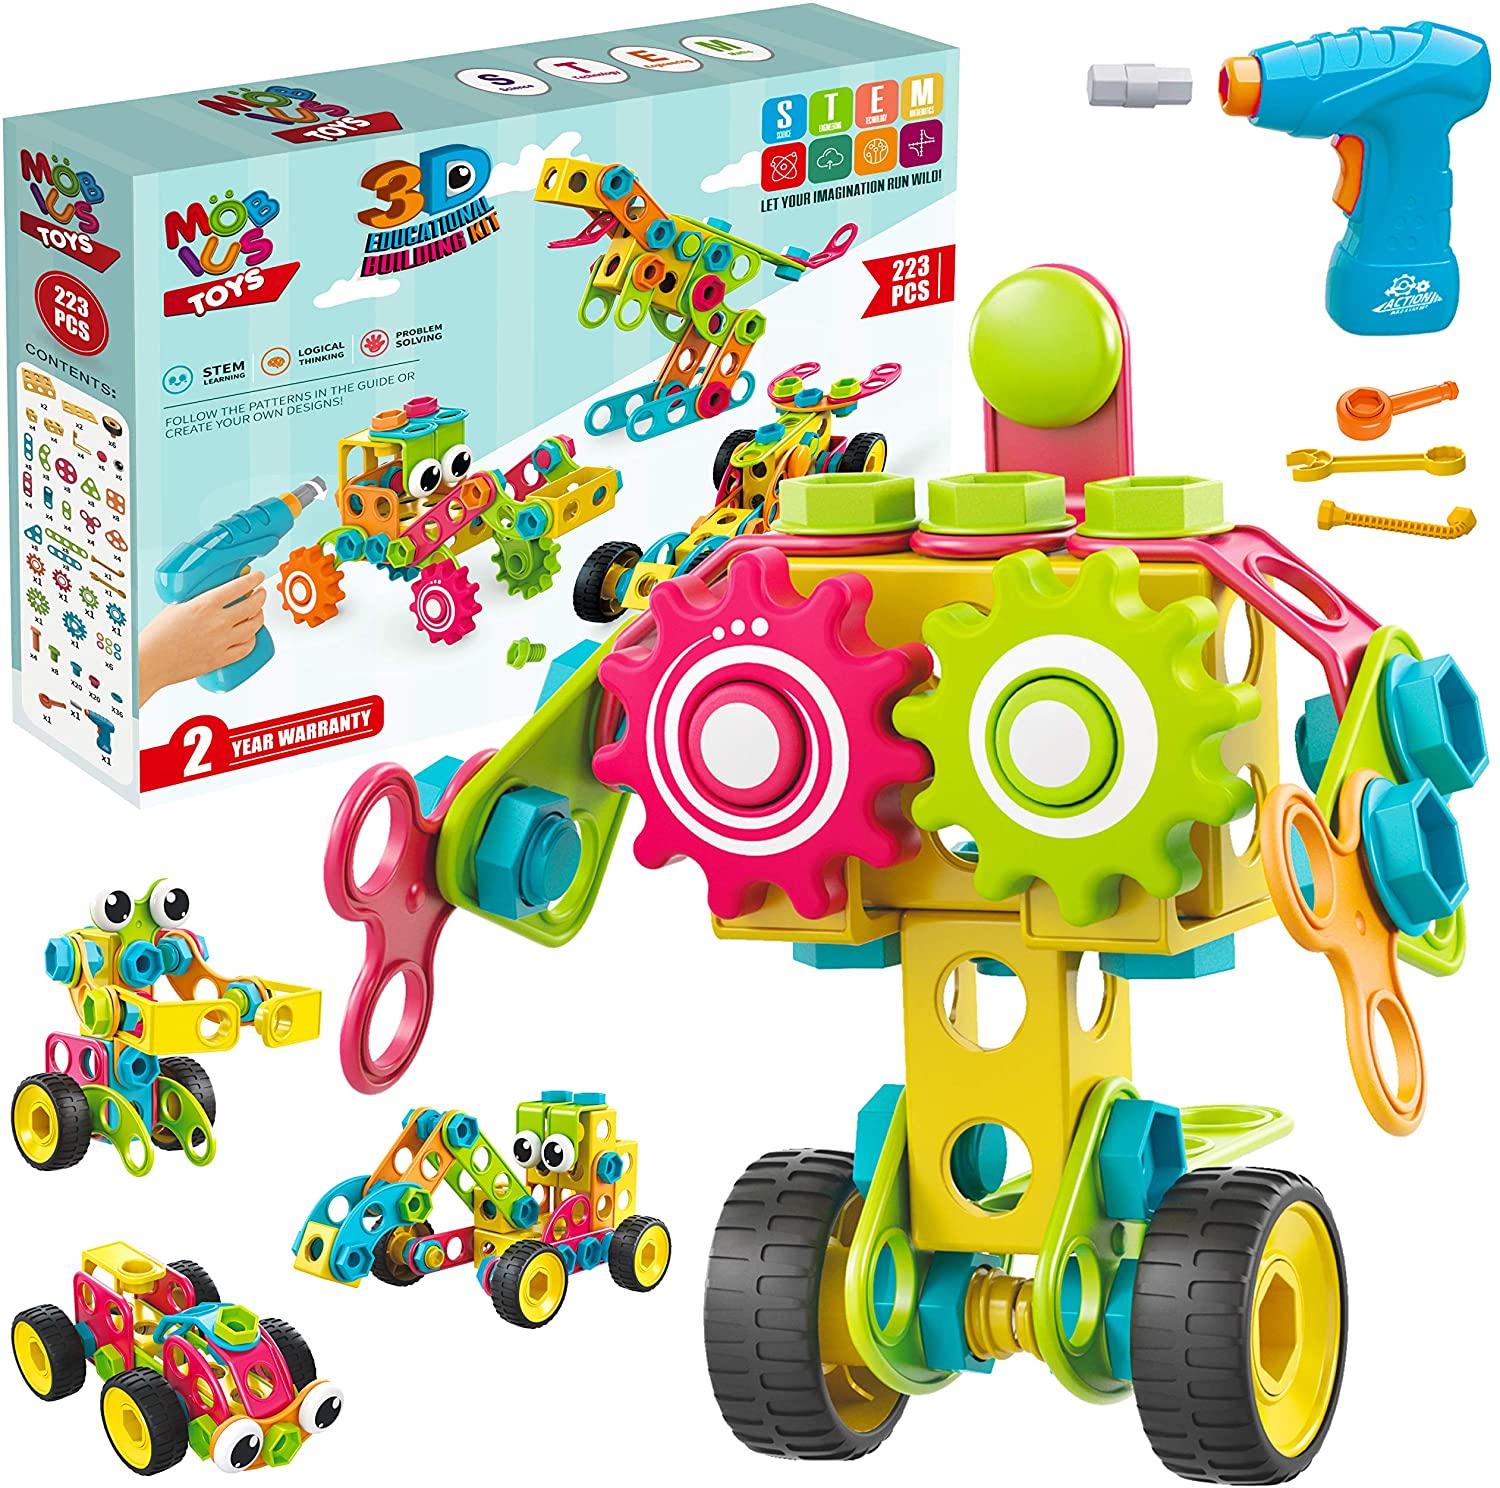 STEM Toys KIT 260 Piece Educational Construction Set with Drill